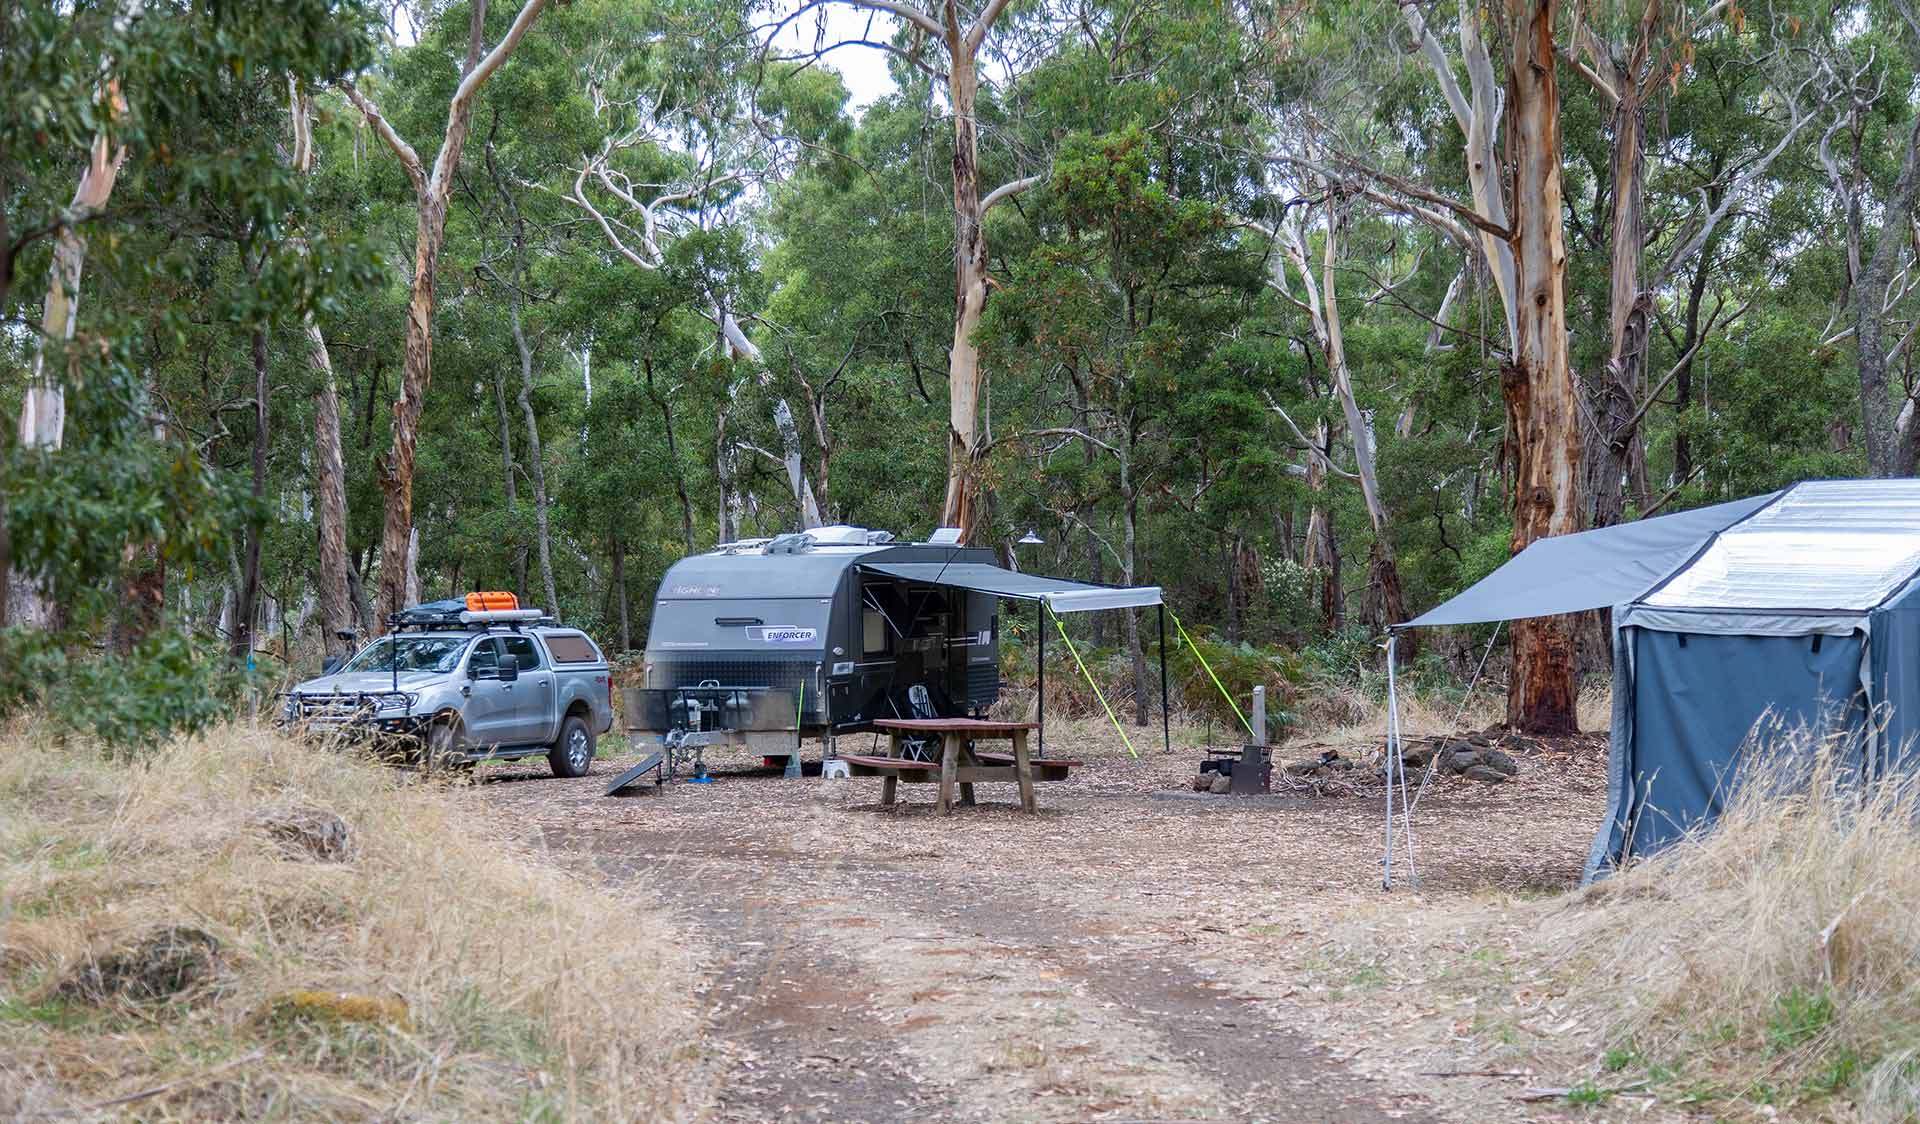 A vehicle path leads to caravan next to a picnic table at Budj Bim Campground at Budj Bim National Park